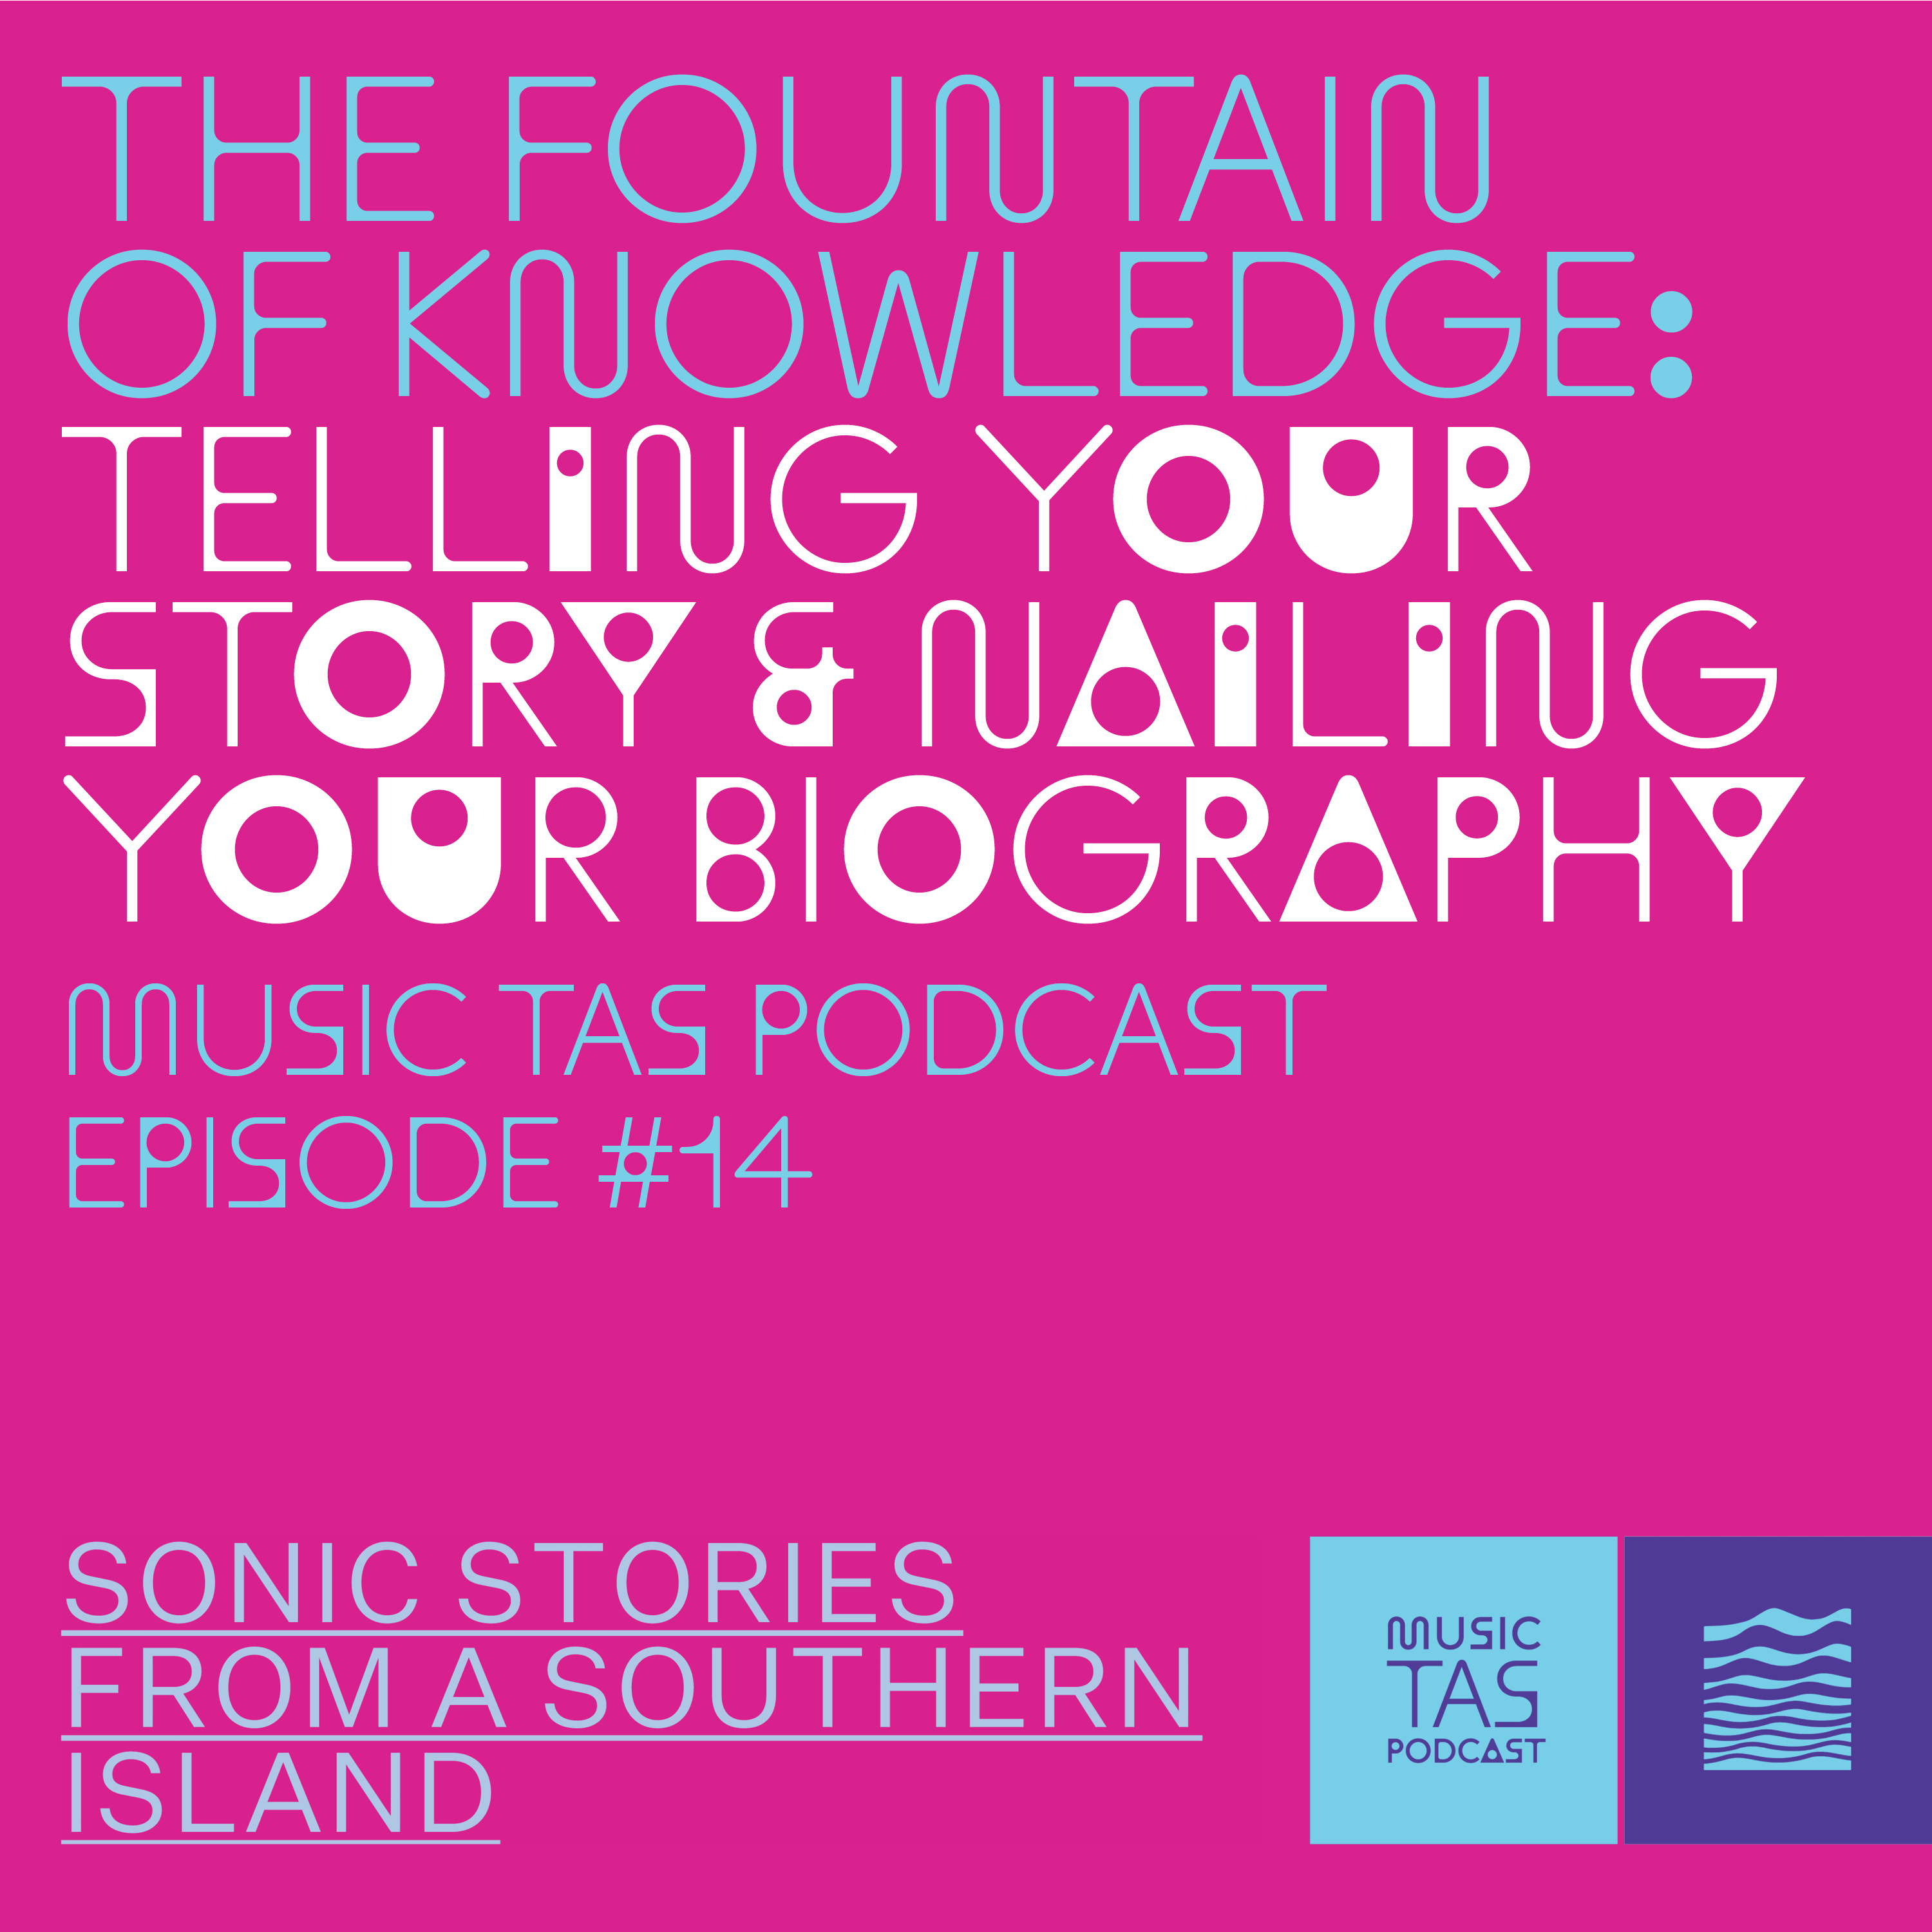 Pink background with blue and white text: The Fountain of Knowledge: Telling your story & nailing your biography. Music Tas Podcast Episode #14.